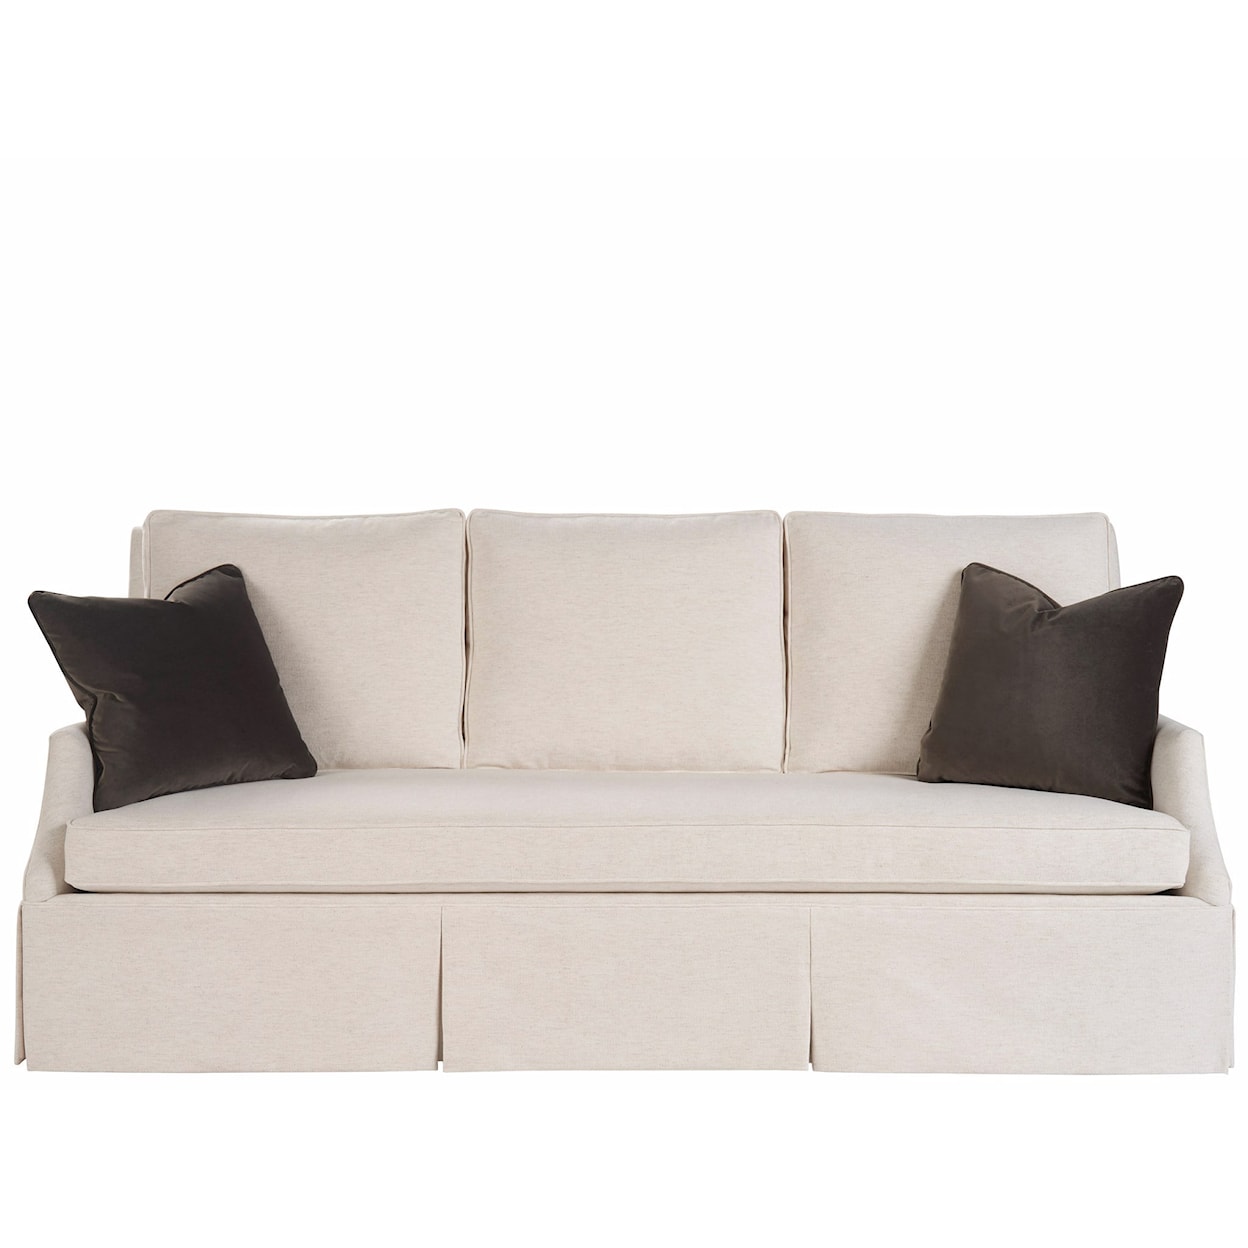 Universal Special Order Jacqueline Skirted Sofa